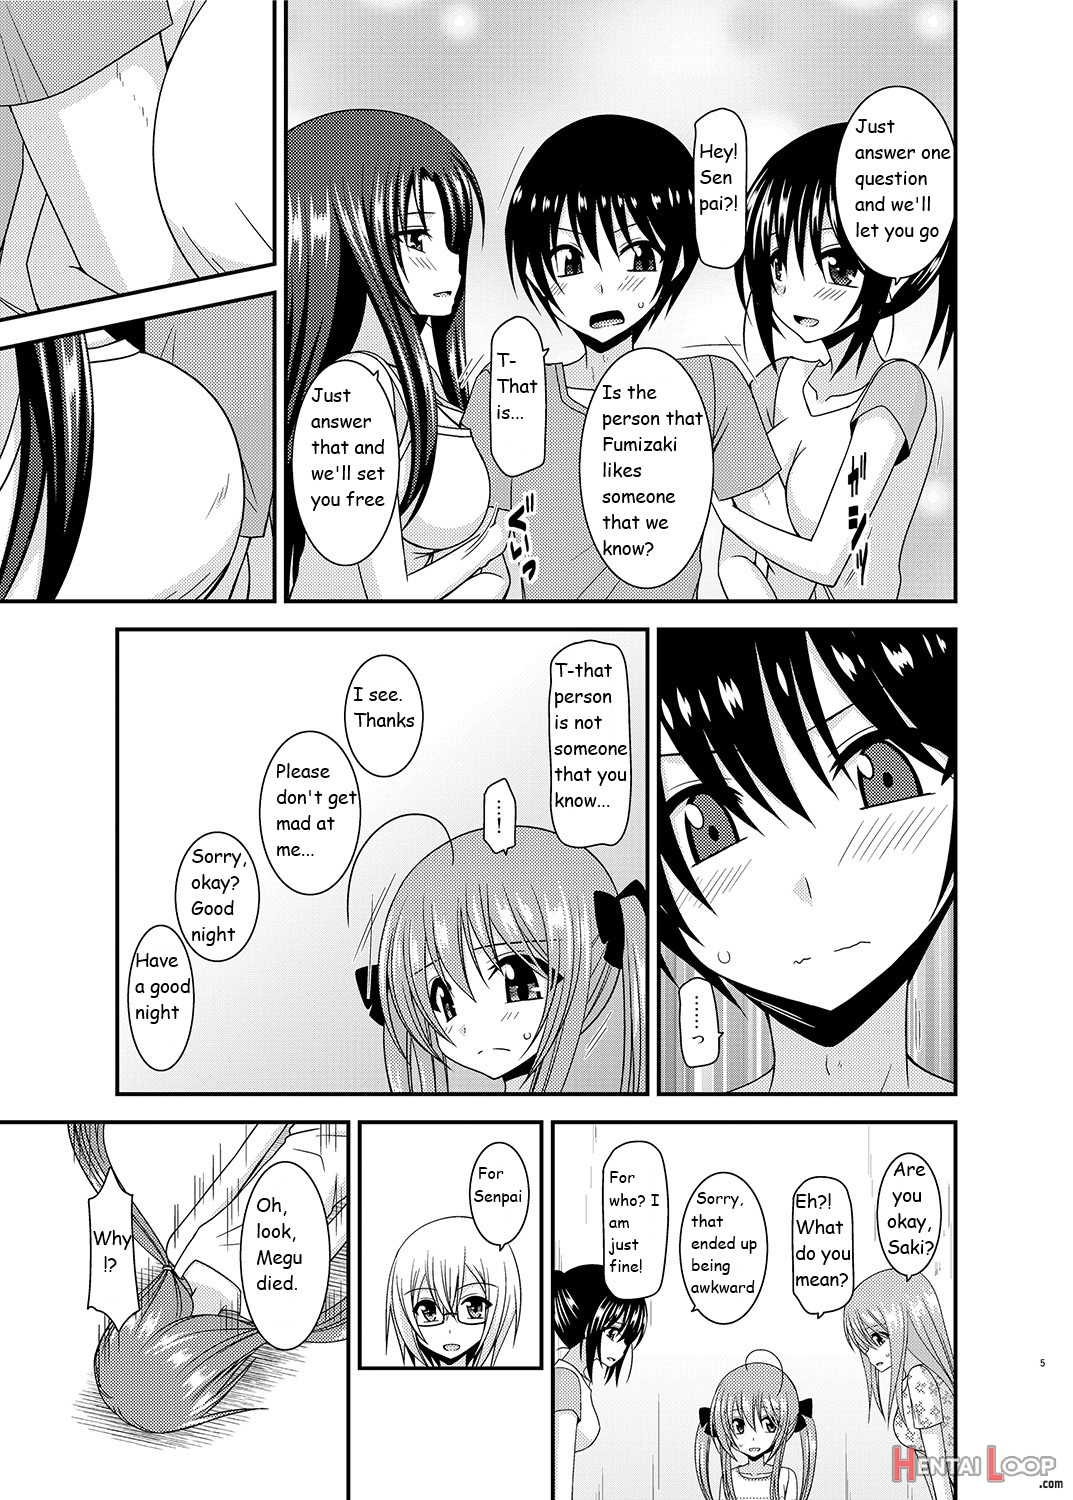 Exhibitionist Girl Diary Chapter 17 page 5